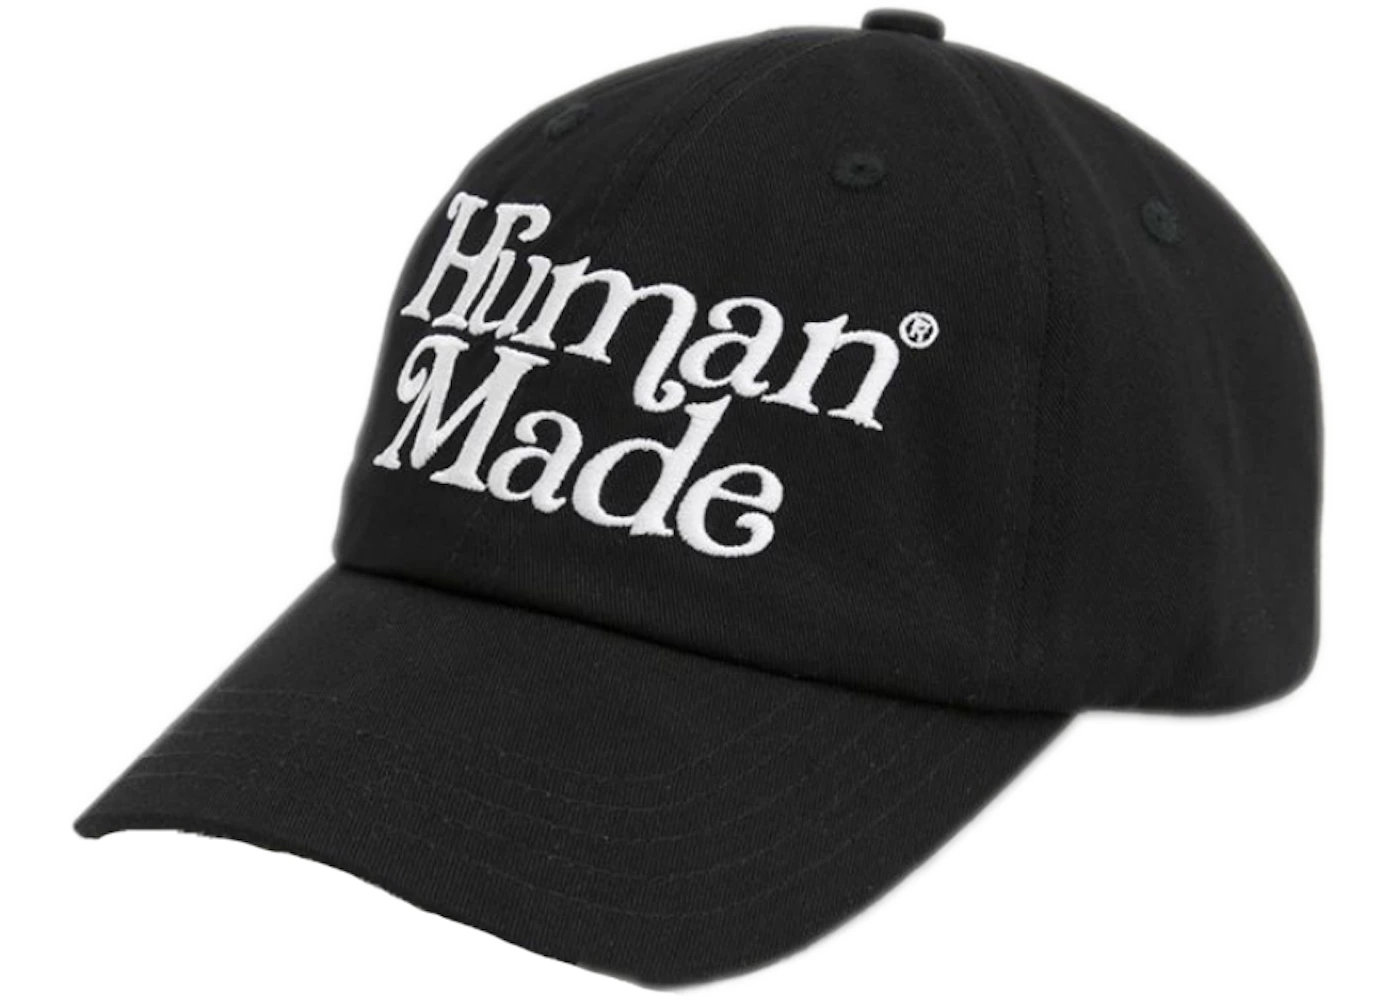 Human Made x Girls Don't Cry Hat Black - SS19 - US